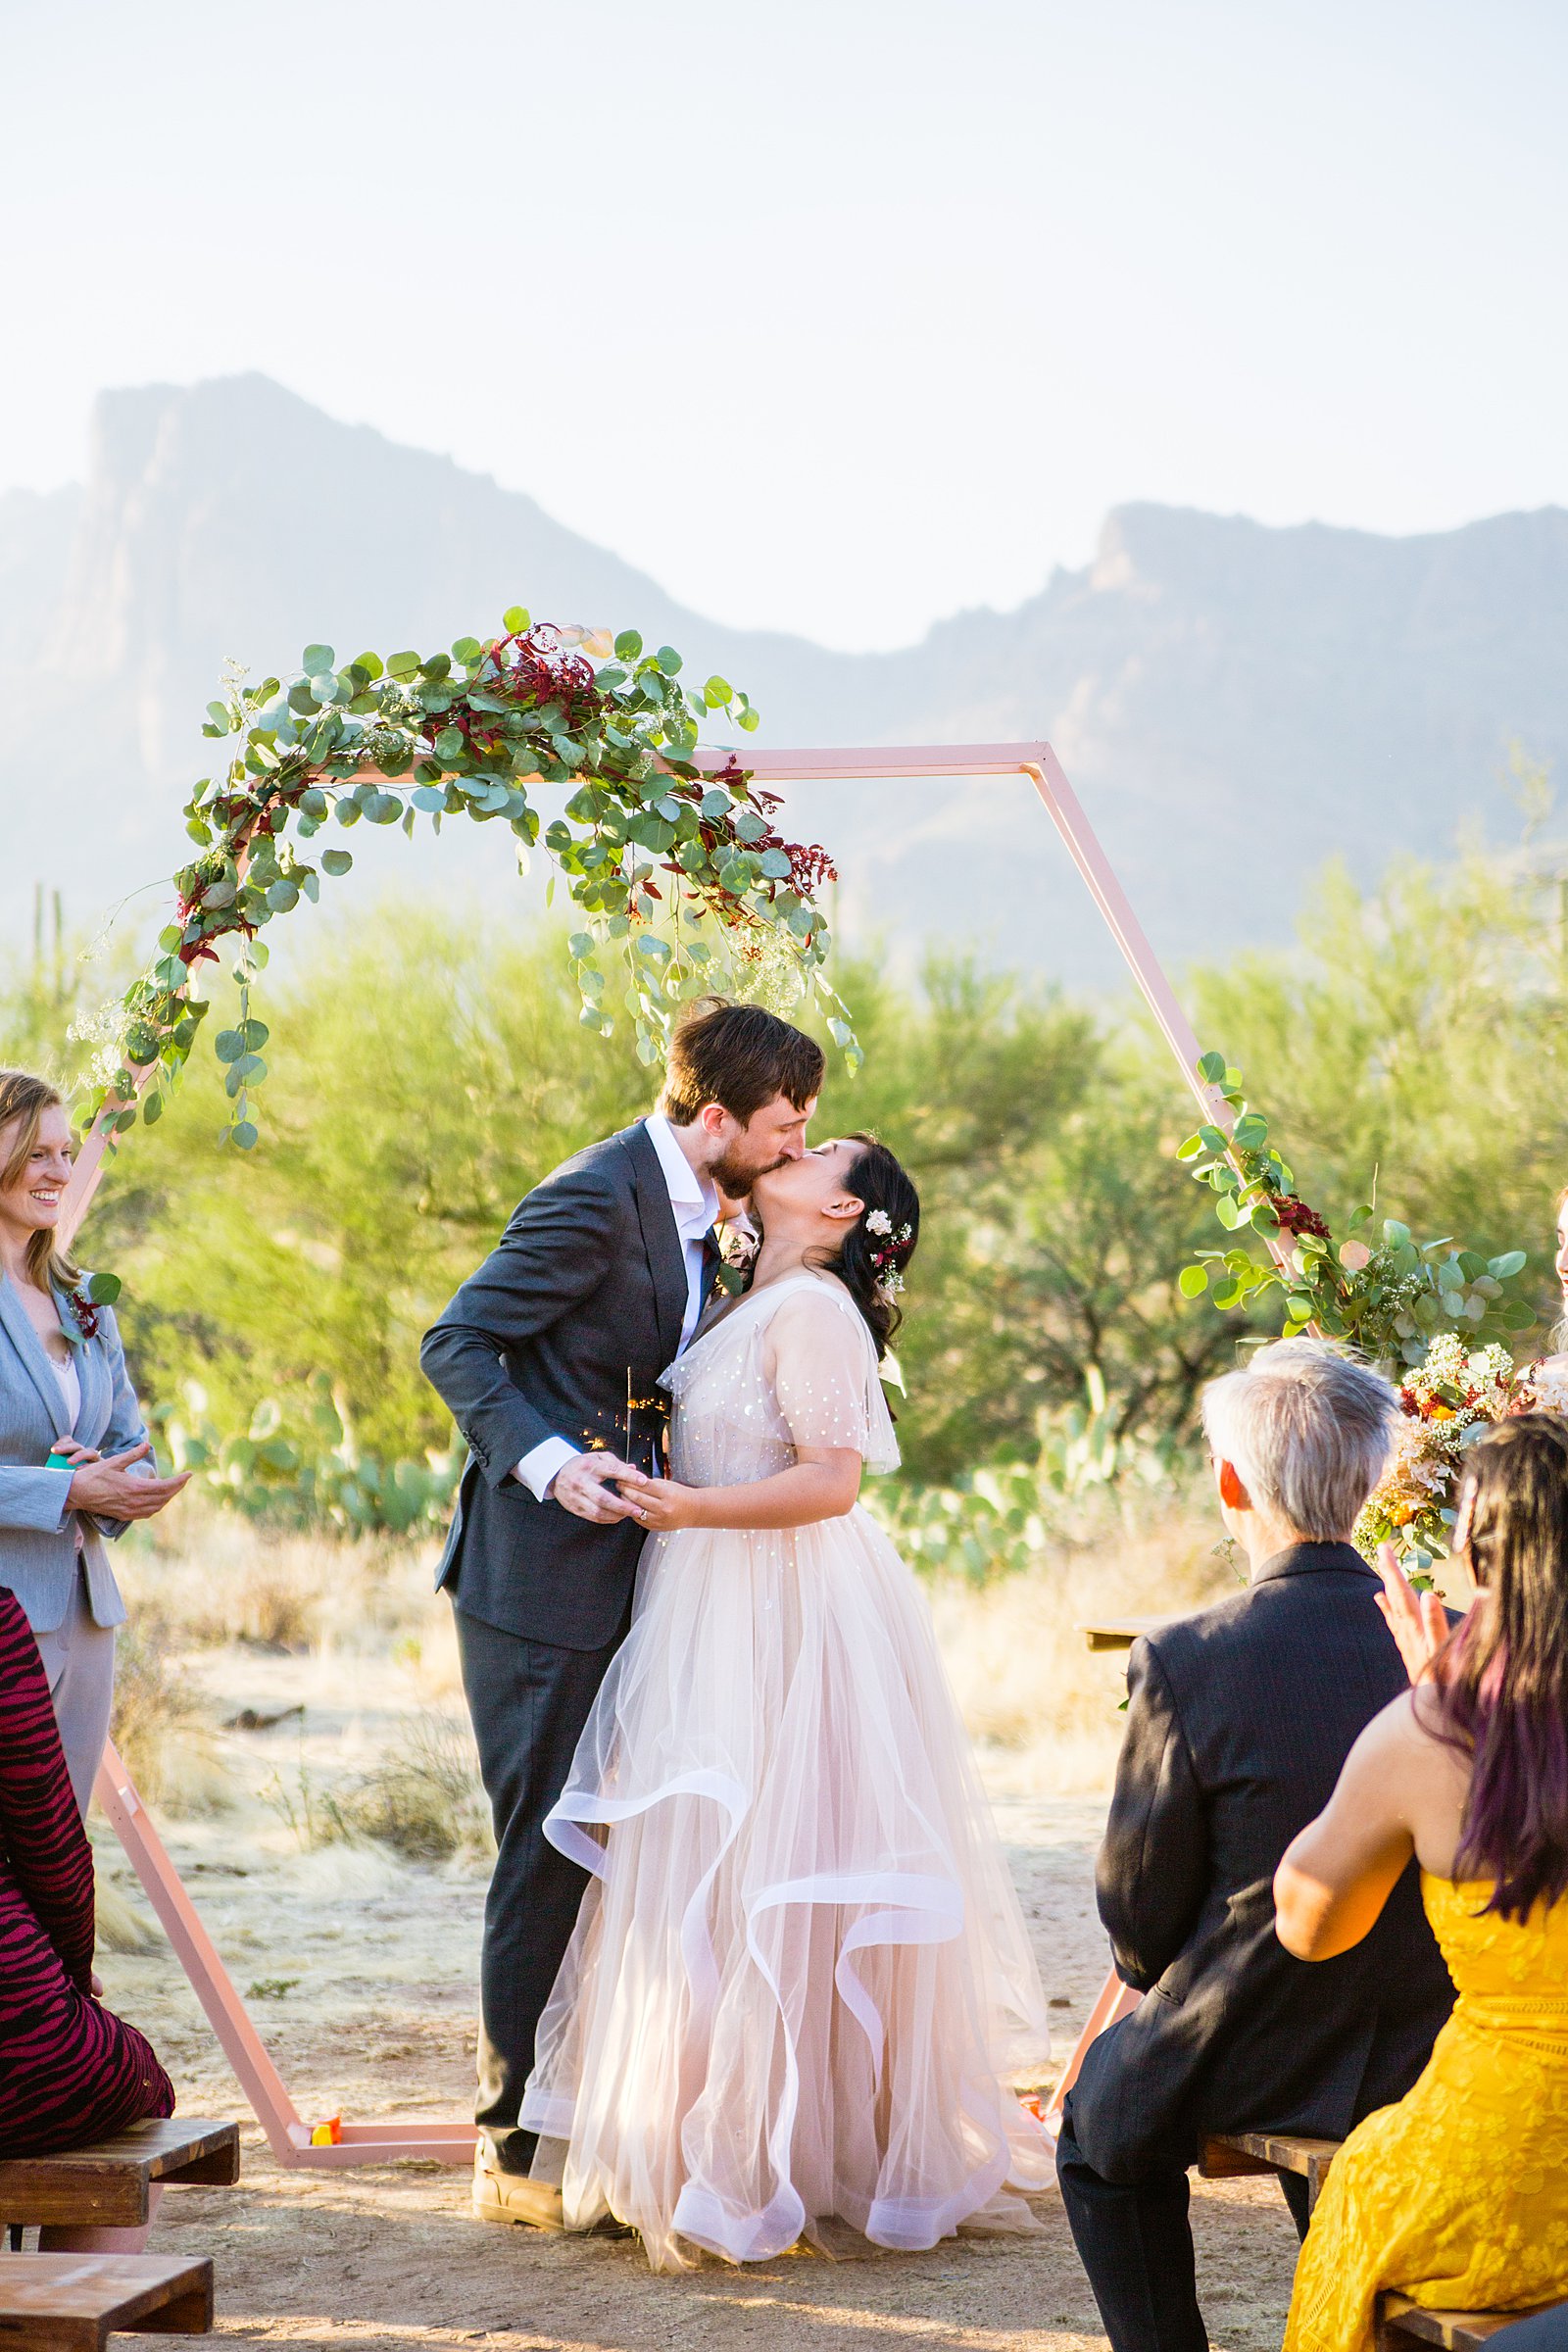 Bride and Groom share their first kiss during their wedding ceremony at the Superstition Mountains by Arizona wedding photographer PMA Photography.